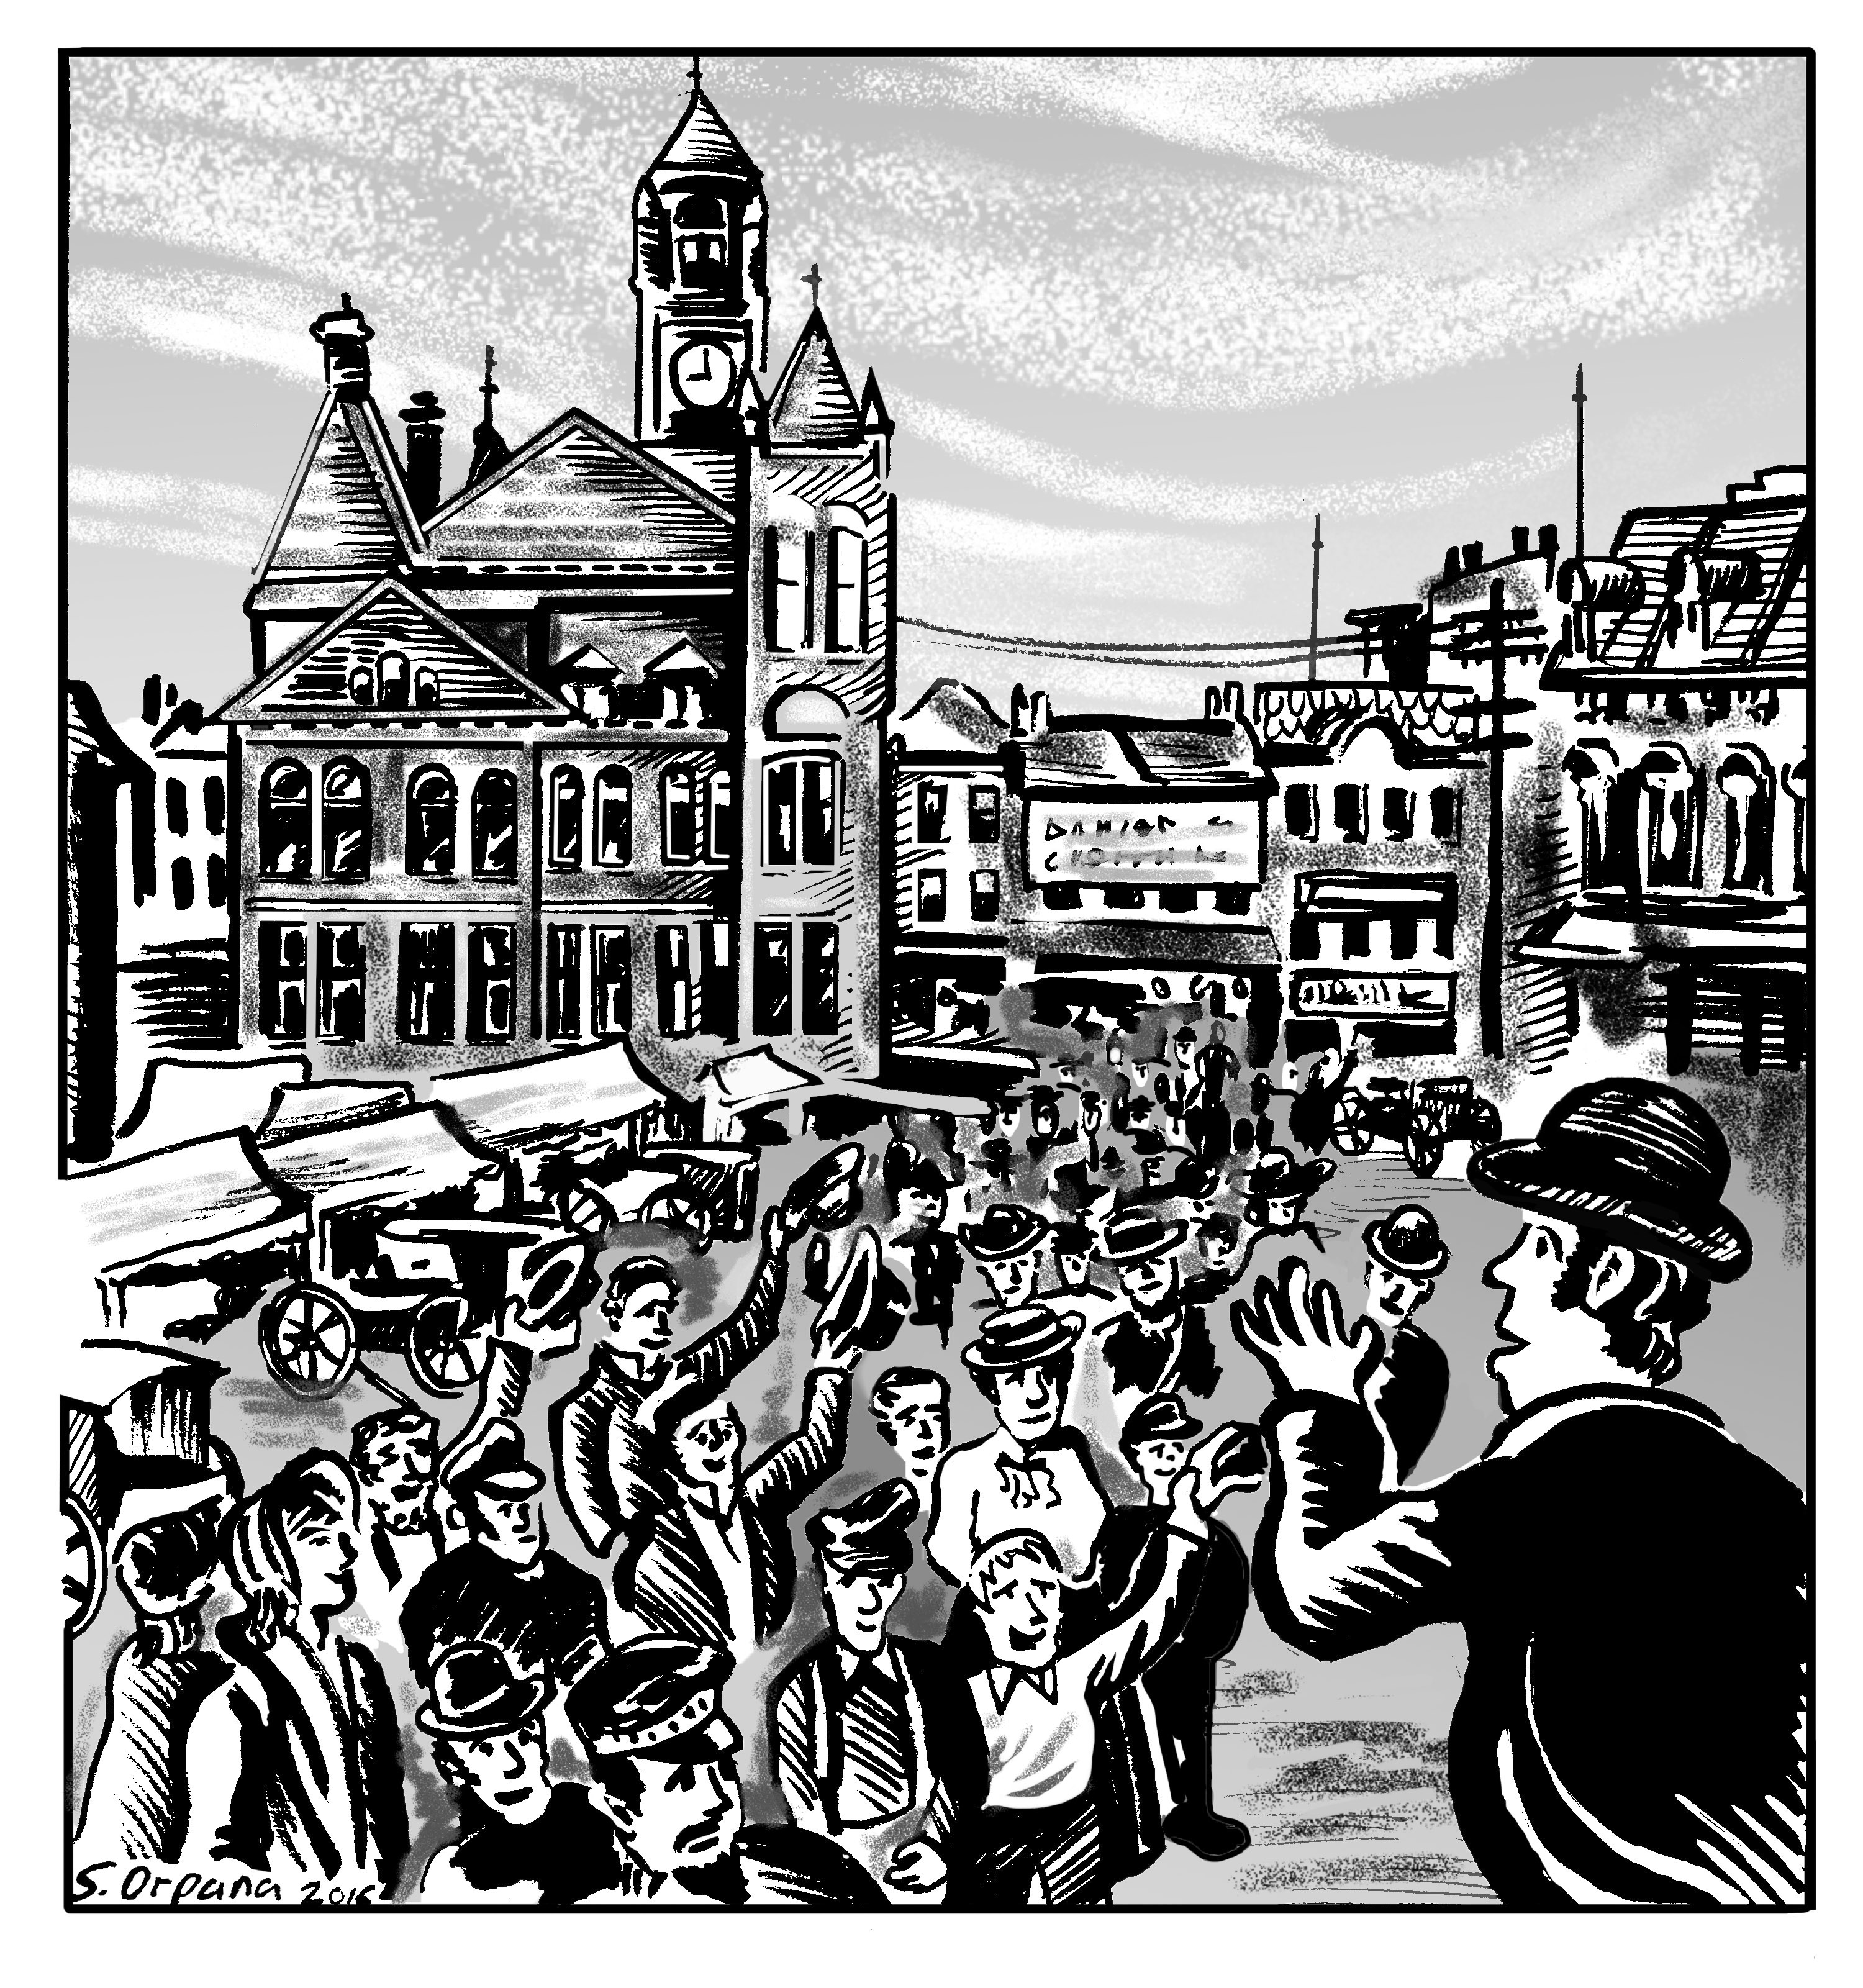 An illustration of James Ryan addressing a crowd in Old Market Square. Ryan is in profile as he faces a crowd of onlookers in the centre of the market. Around the edges of the illustration are temporary outdoor market stalls and permanent commercial buildings.